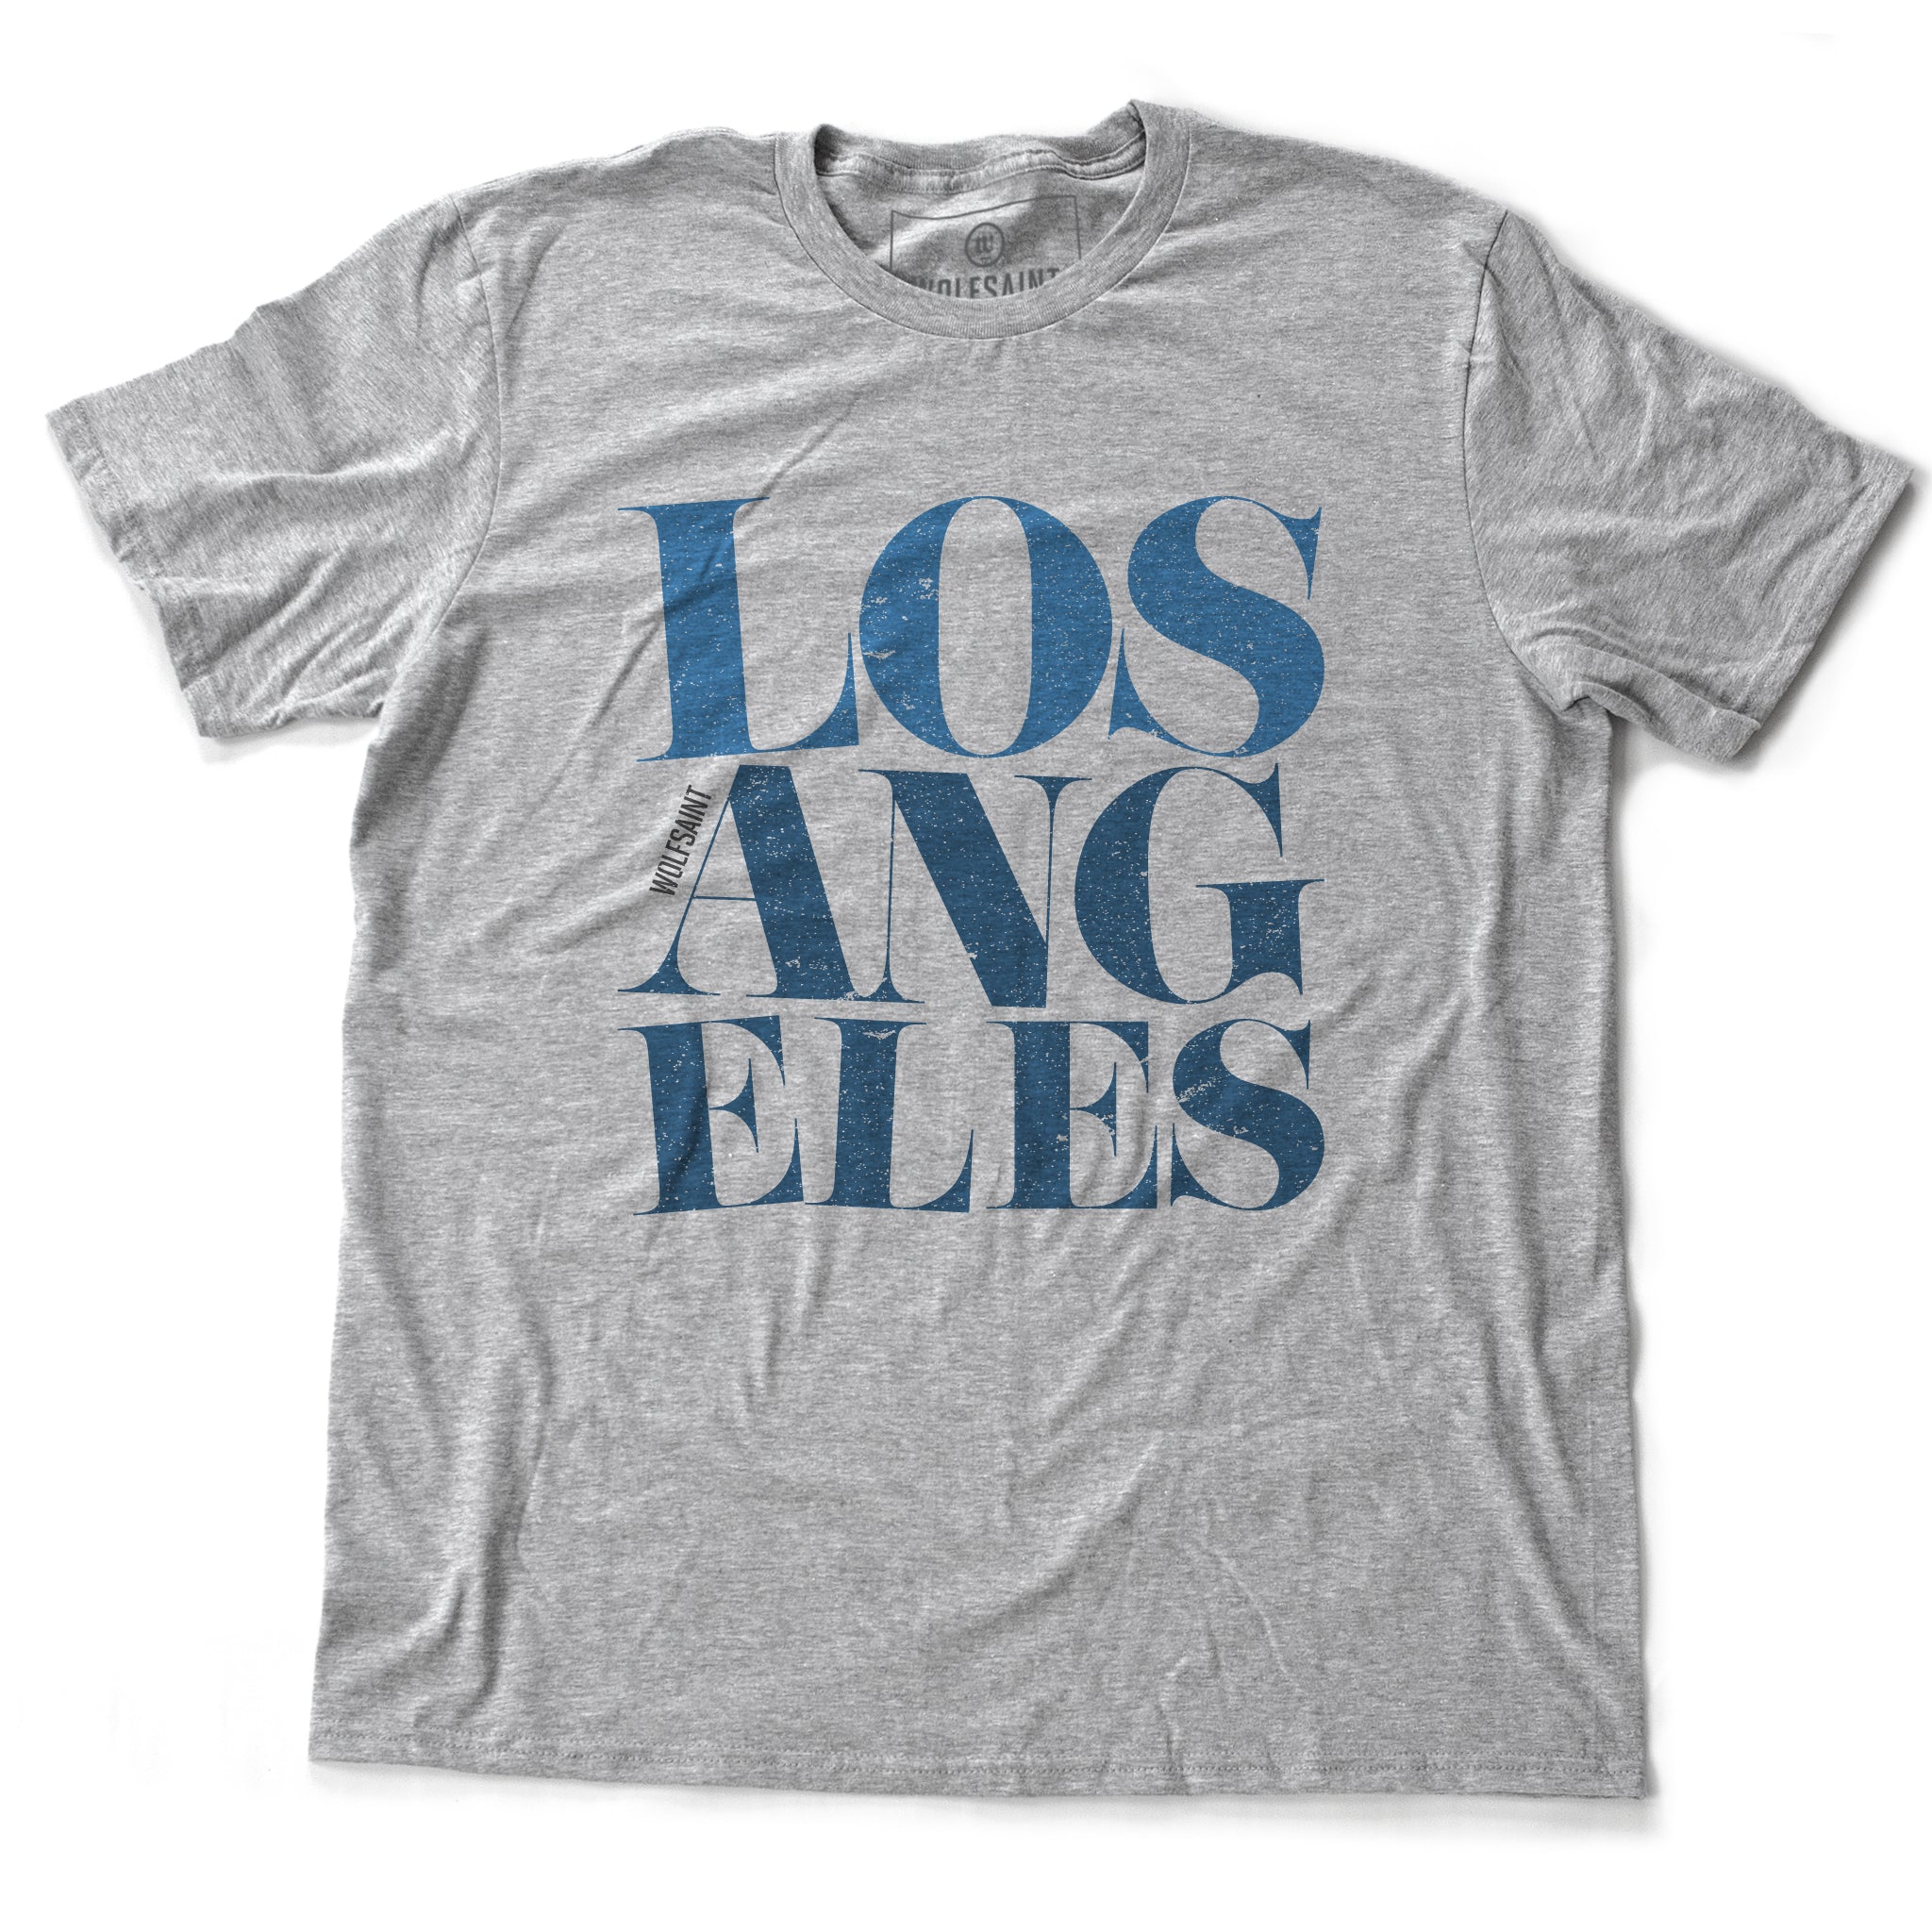 A fashionable heather gray graphic t-shirt featuring the word “LOS ANGELES” in a elegant font, stacked in three tilted lines to sarcastically simulate an earthquake. From wolfsaint.net